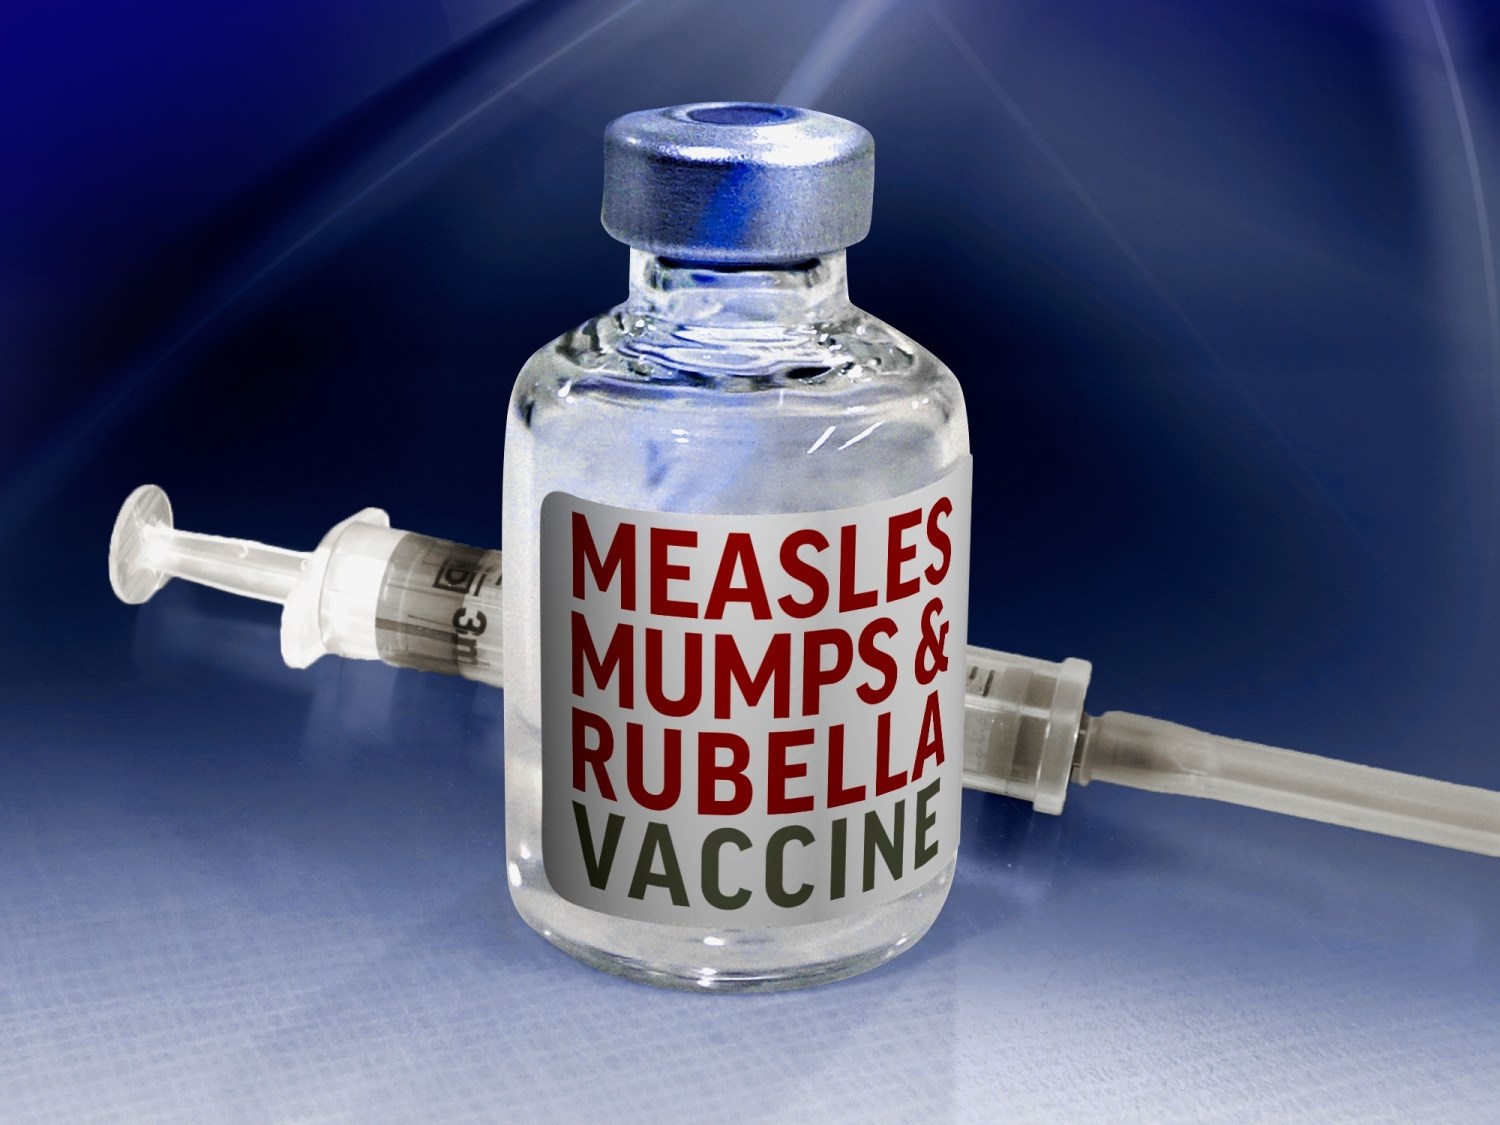 Clay County Public Health Center releases notice about possible measles exposure